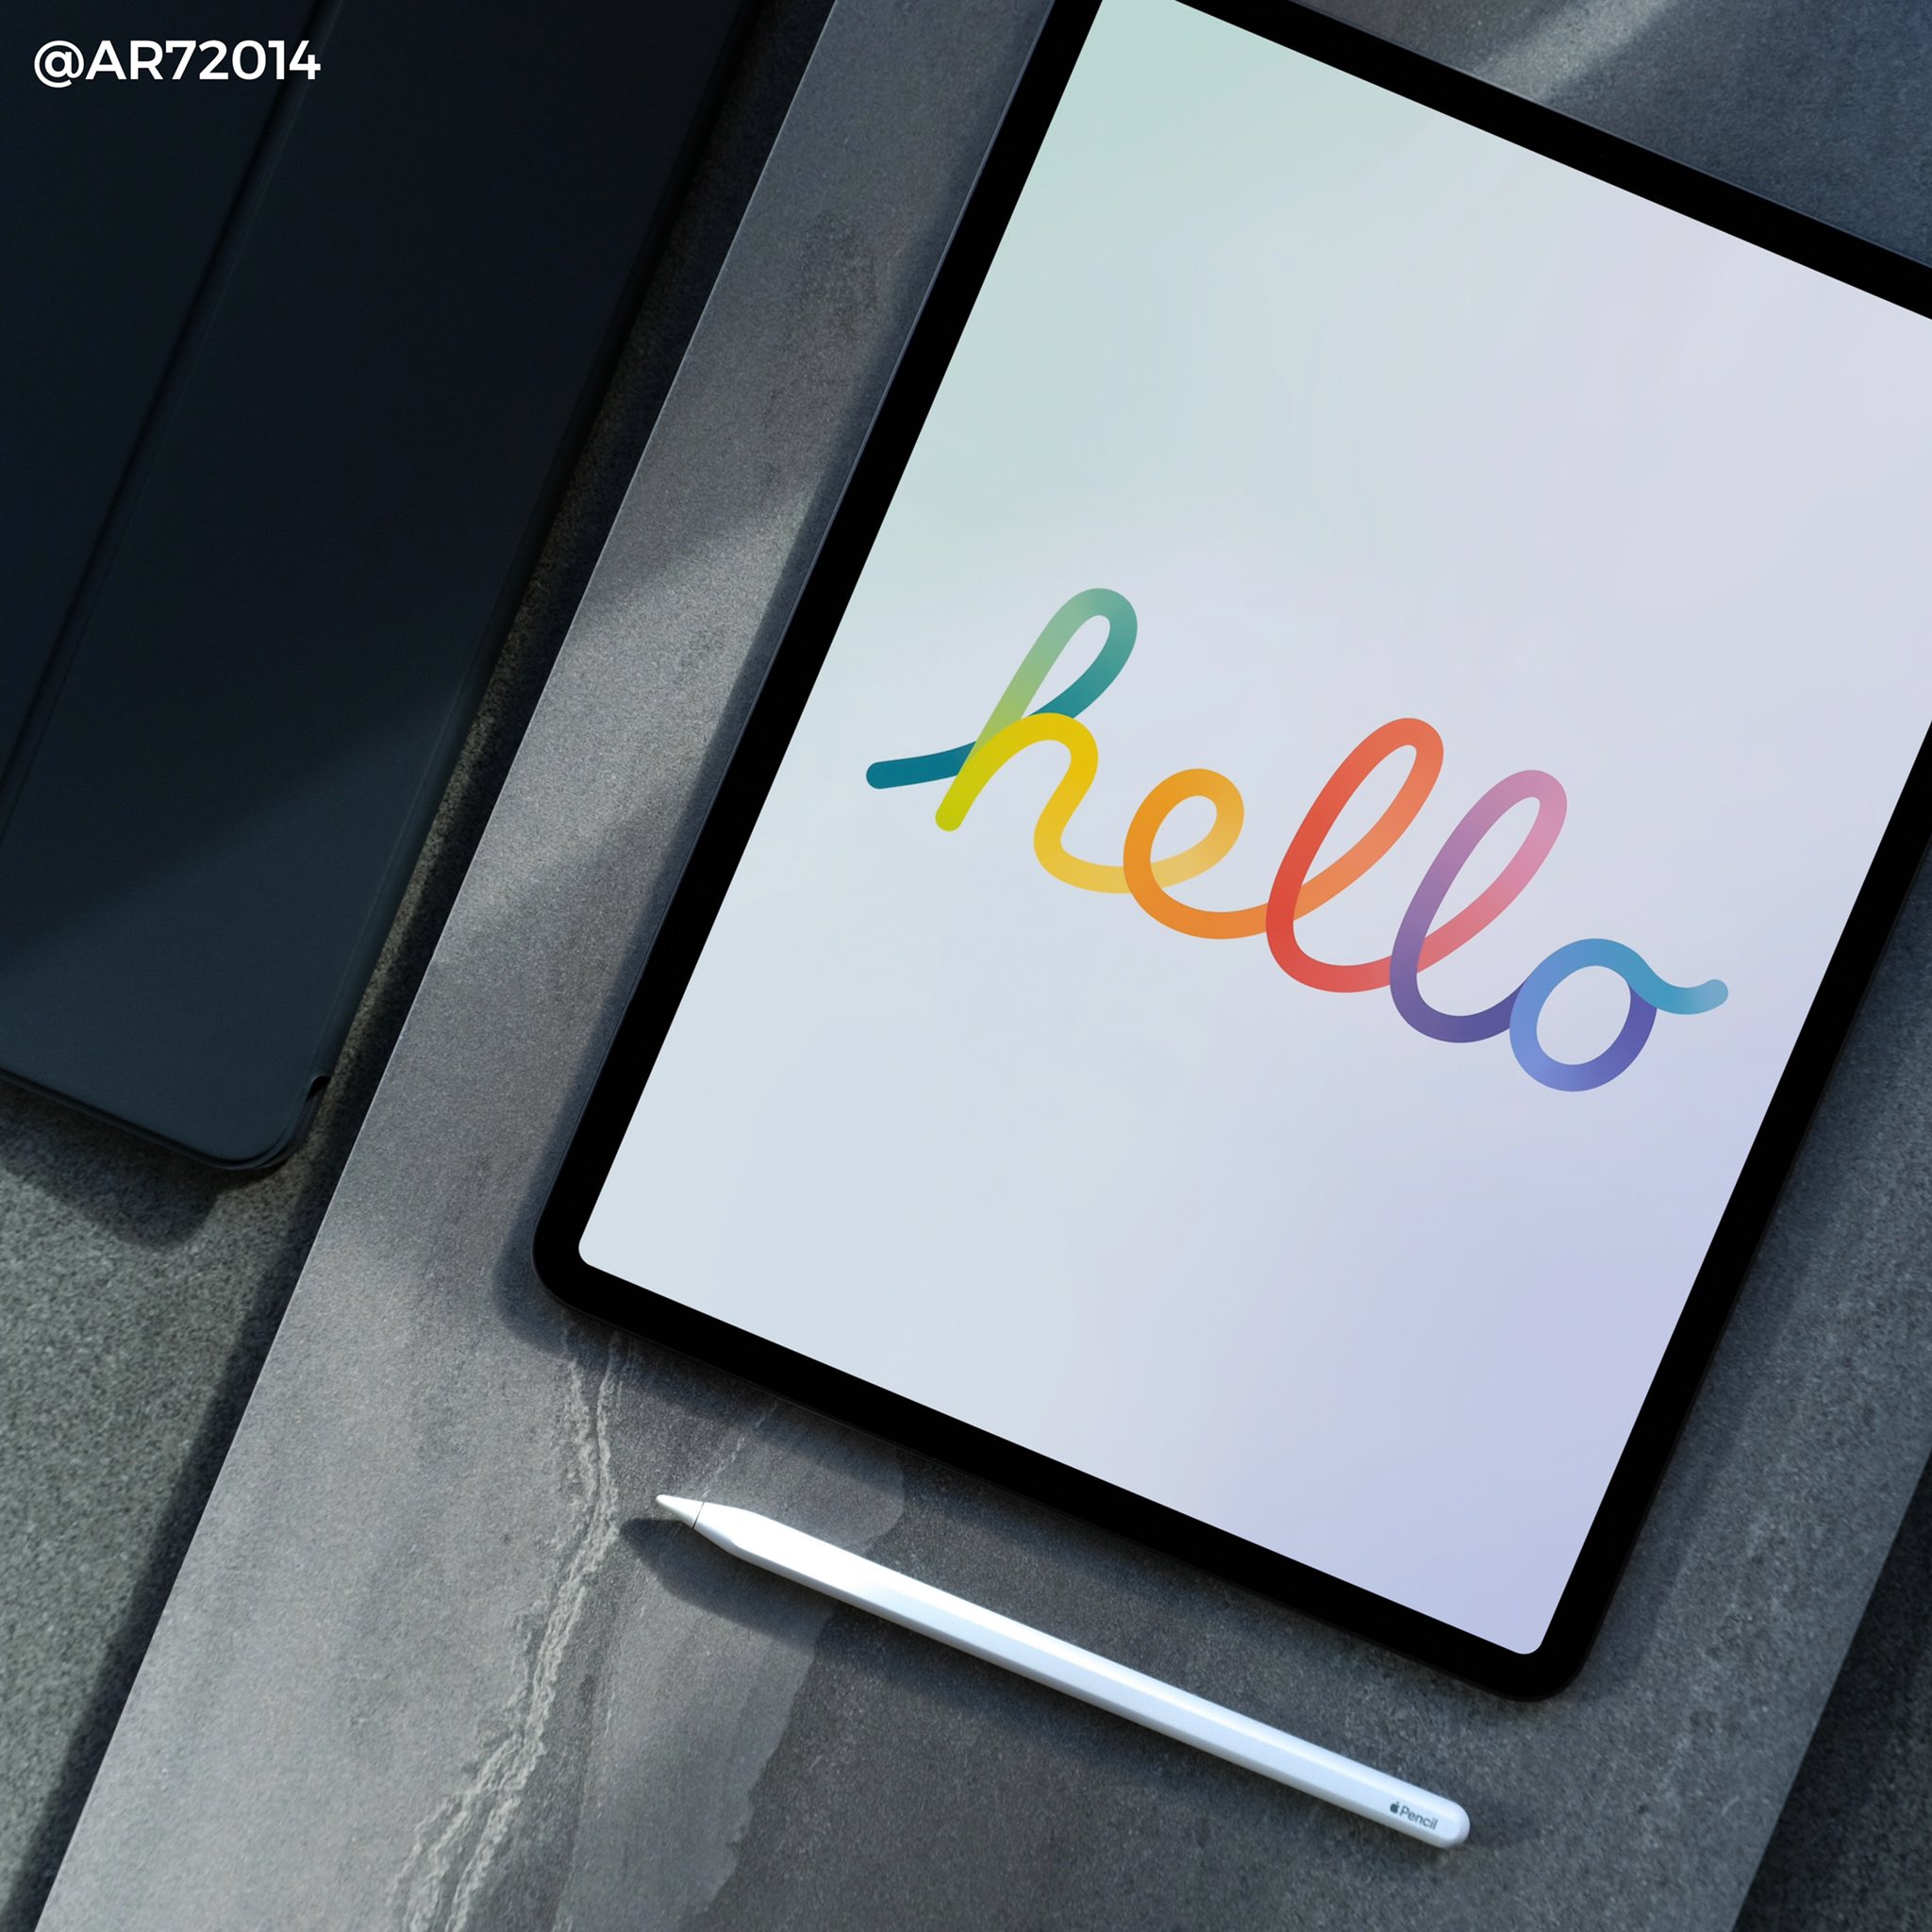 Download M1 Mac 'Hello' Wallpapers For iPhone, iPad And Mac Here - iOS  Hacker